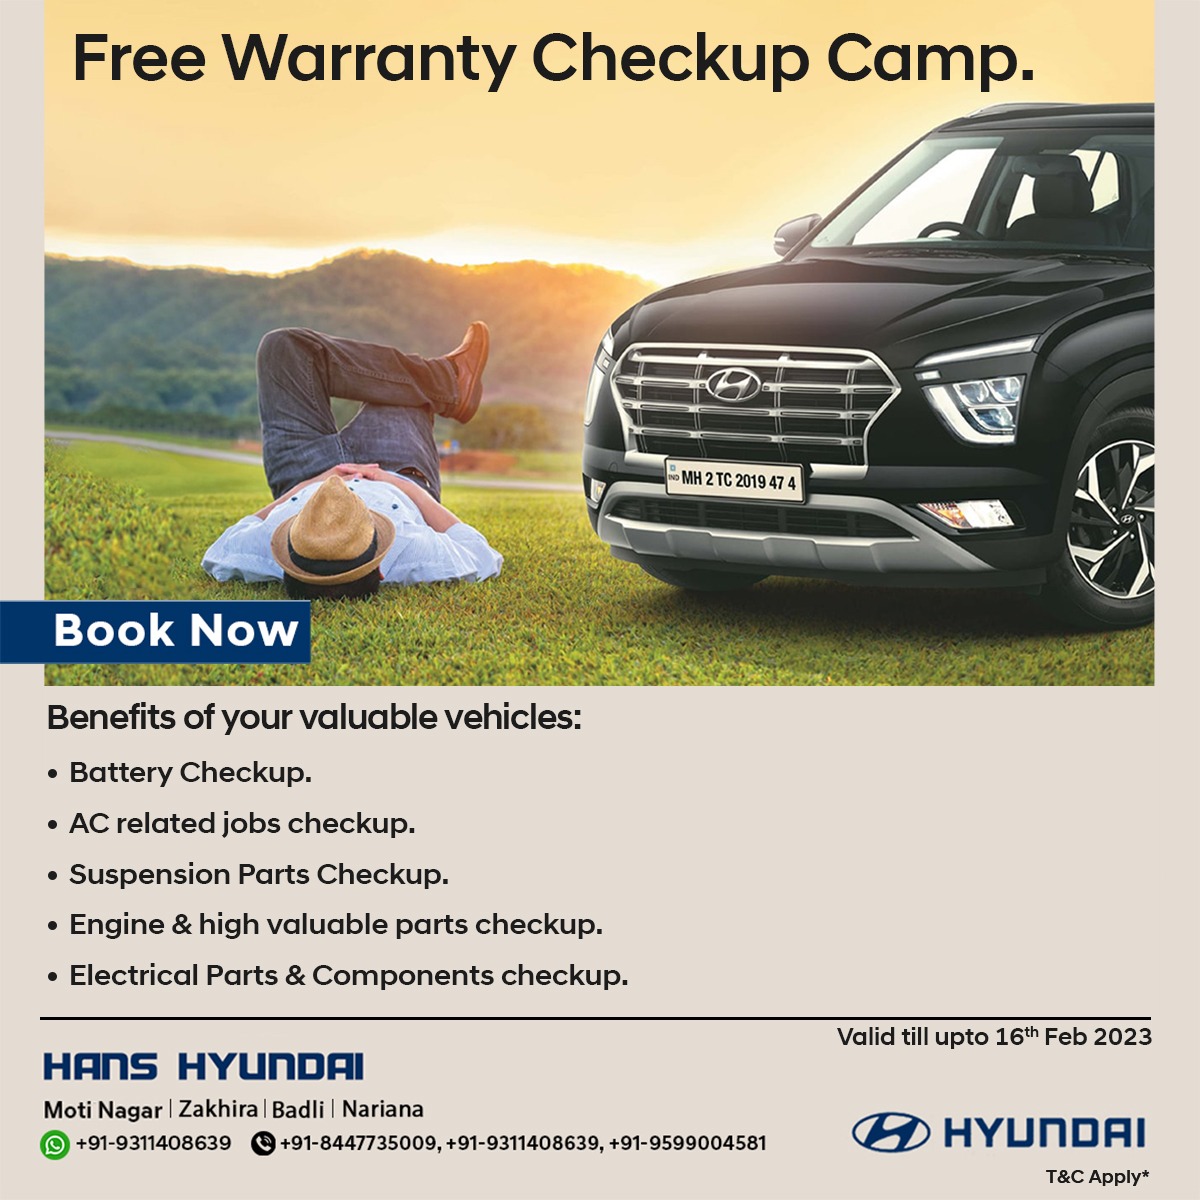 Free Warranty Checkup Camp. Offers